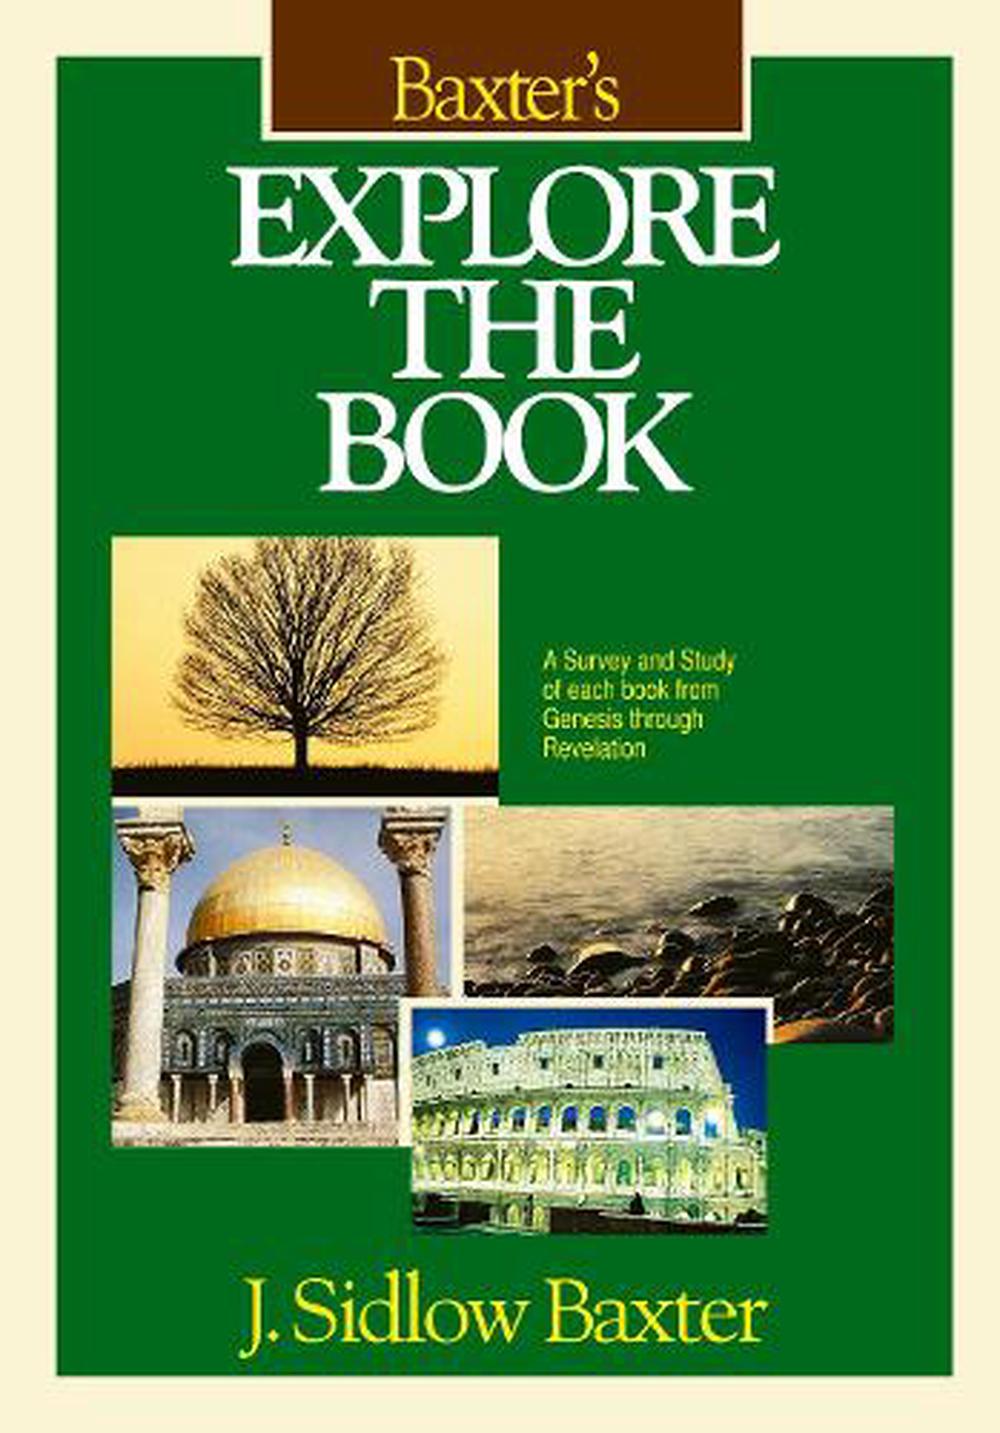 Baxter's Explore the Book by J. Sidlow Baxter (English) Hardcover Book